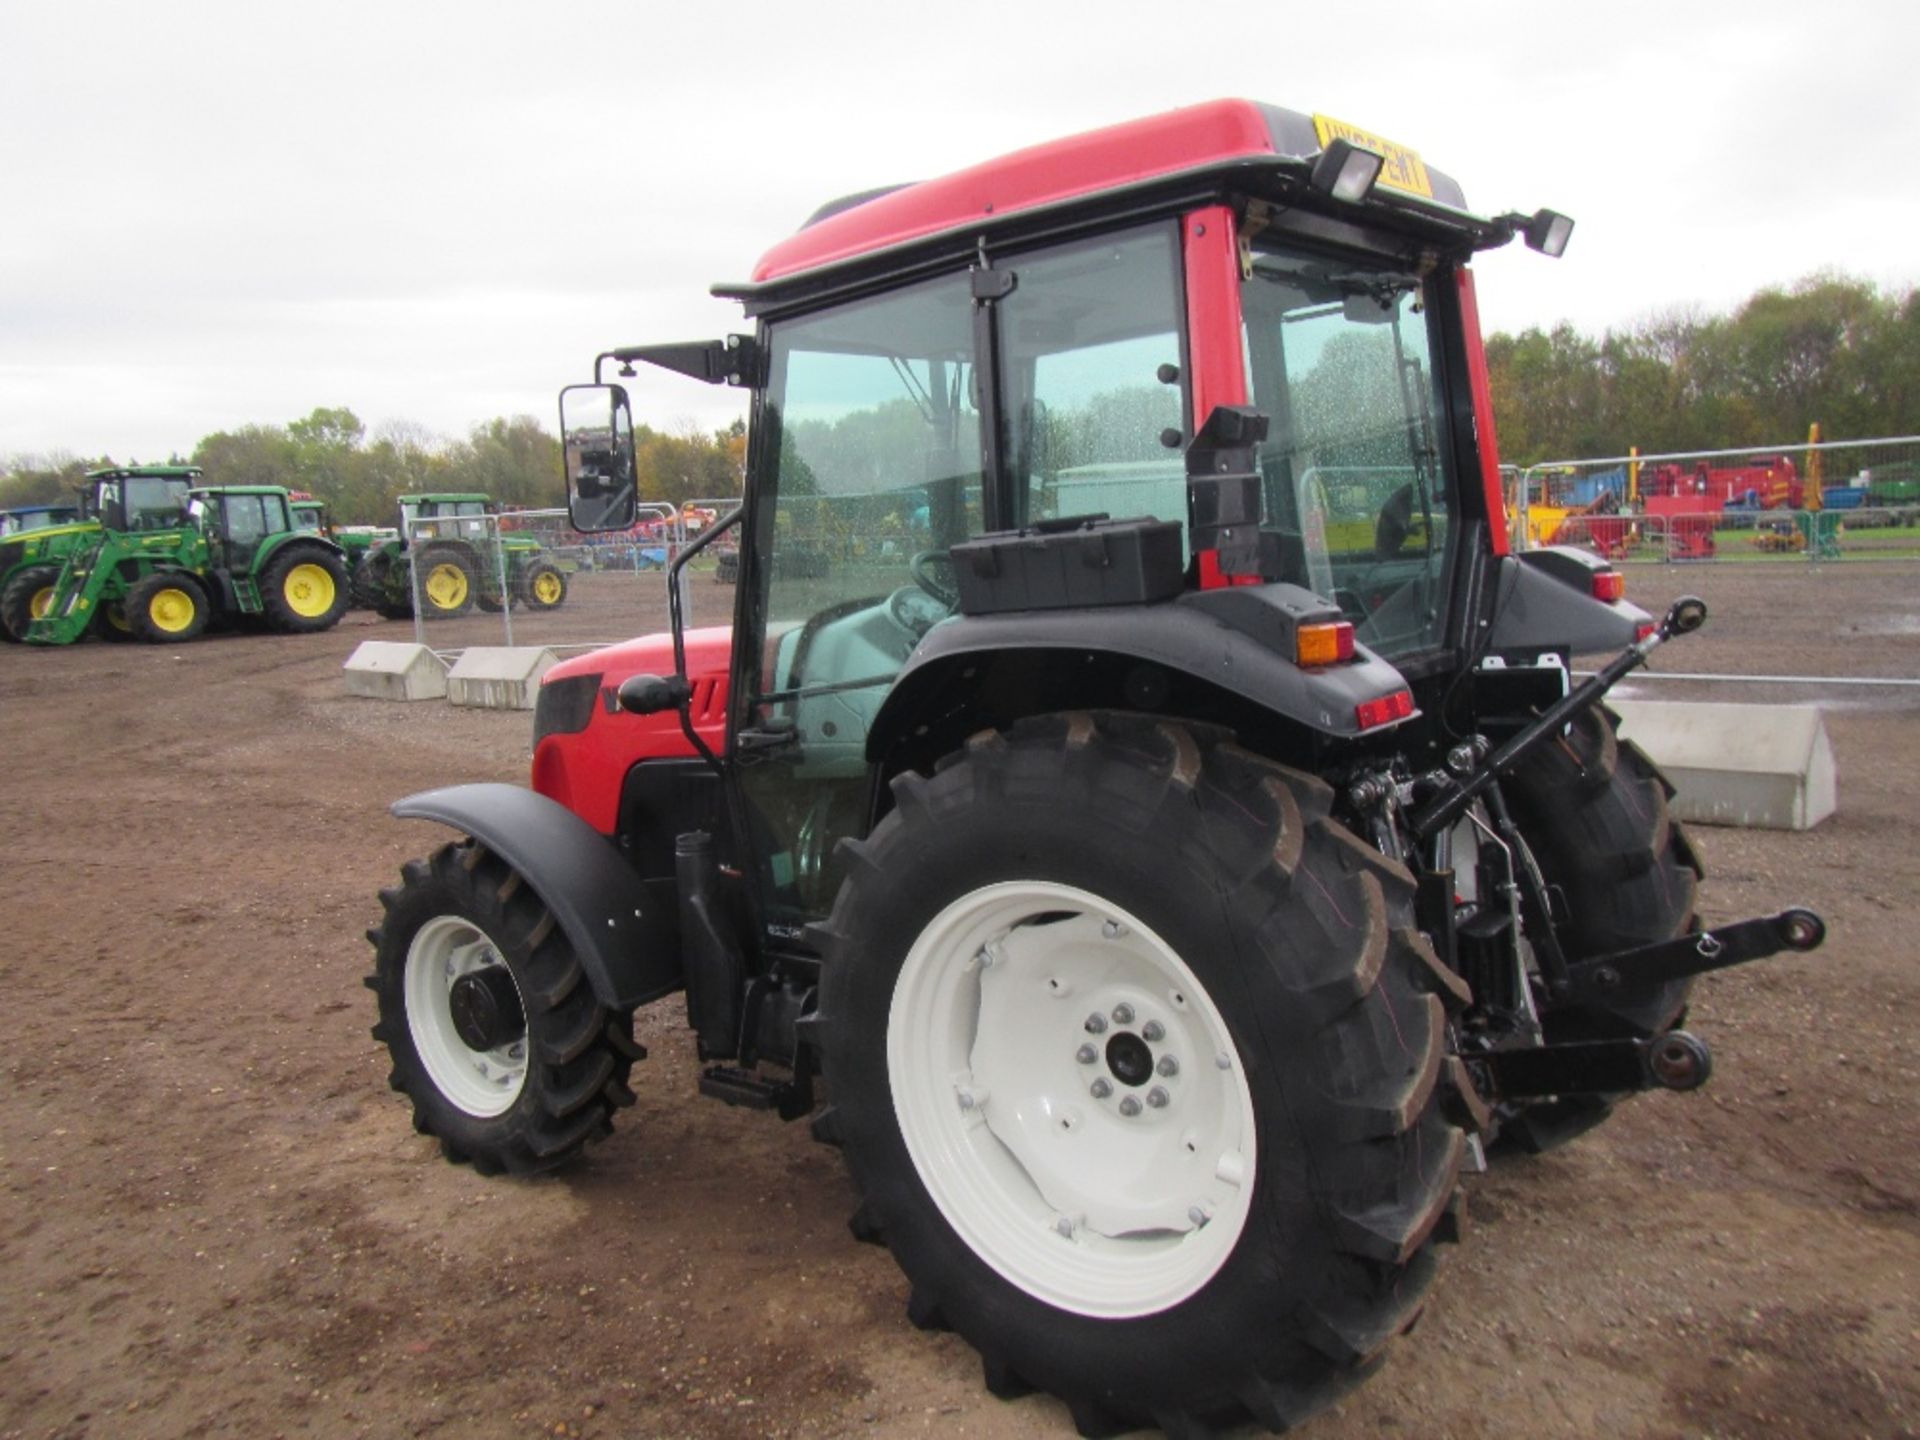 2015 Valtra A73C 4wd Tractor 40k, 12+12 Synchro, Mechanical Shuttle, 2 Spools, Air Con, 540/540E - Image 9 of 17